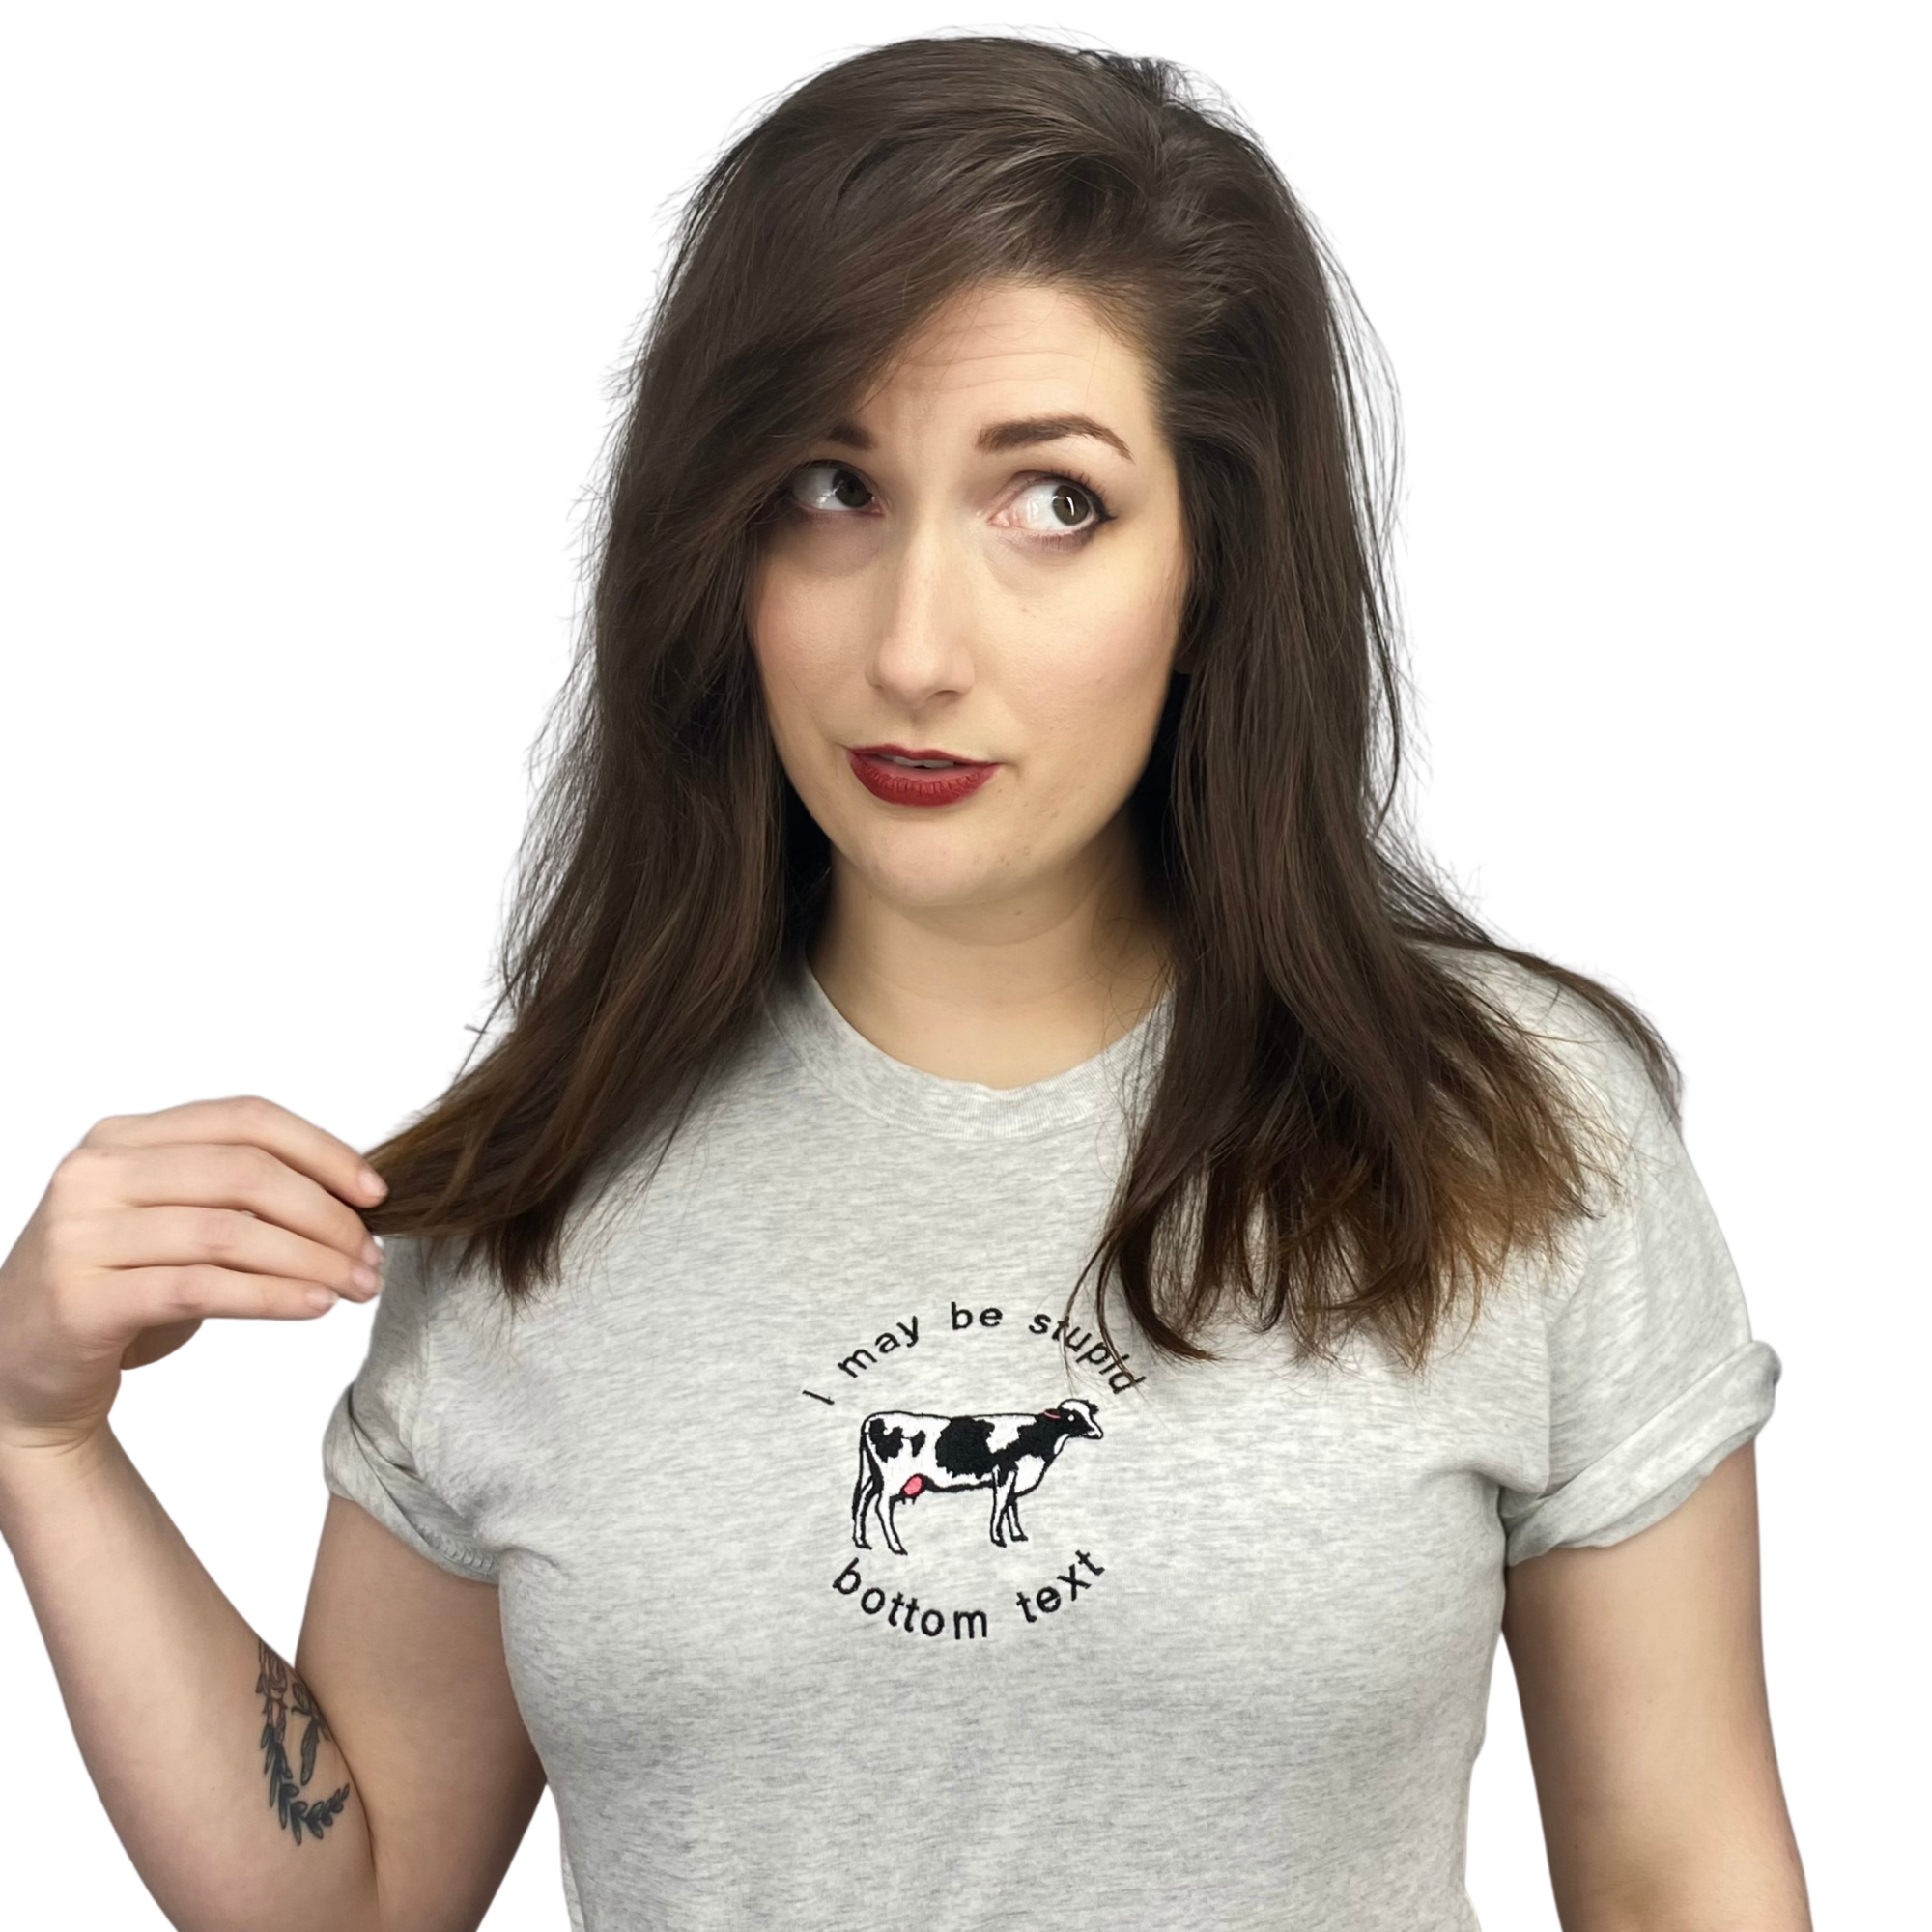 I May Be Stupid Bottom Text Cow Embroidered Shirt Unisex